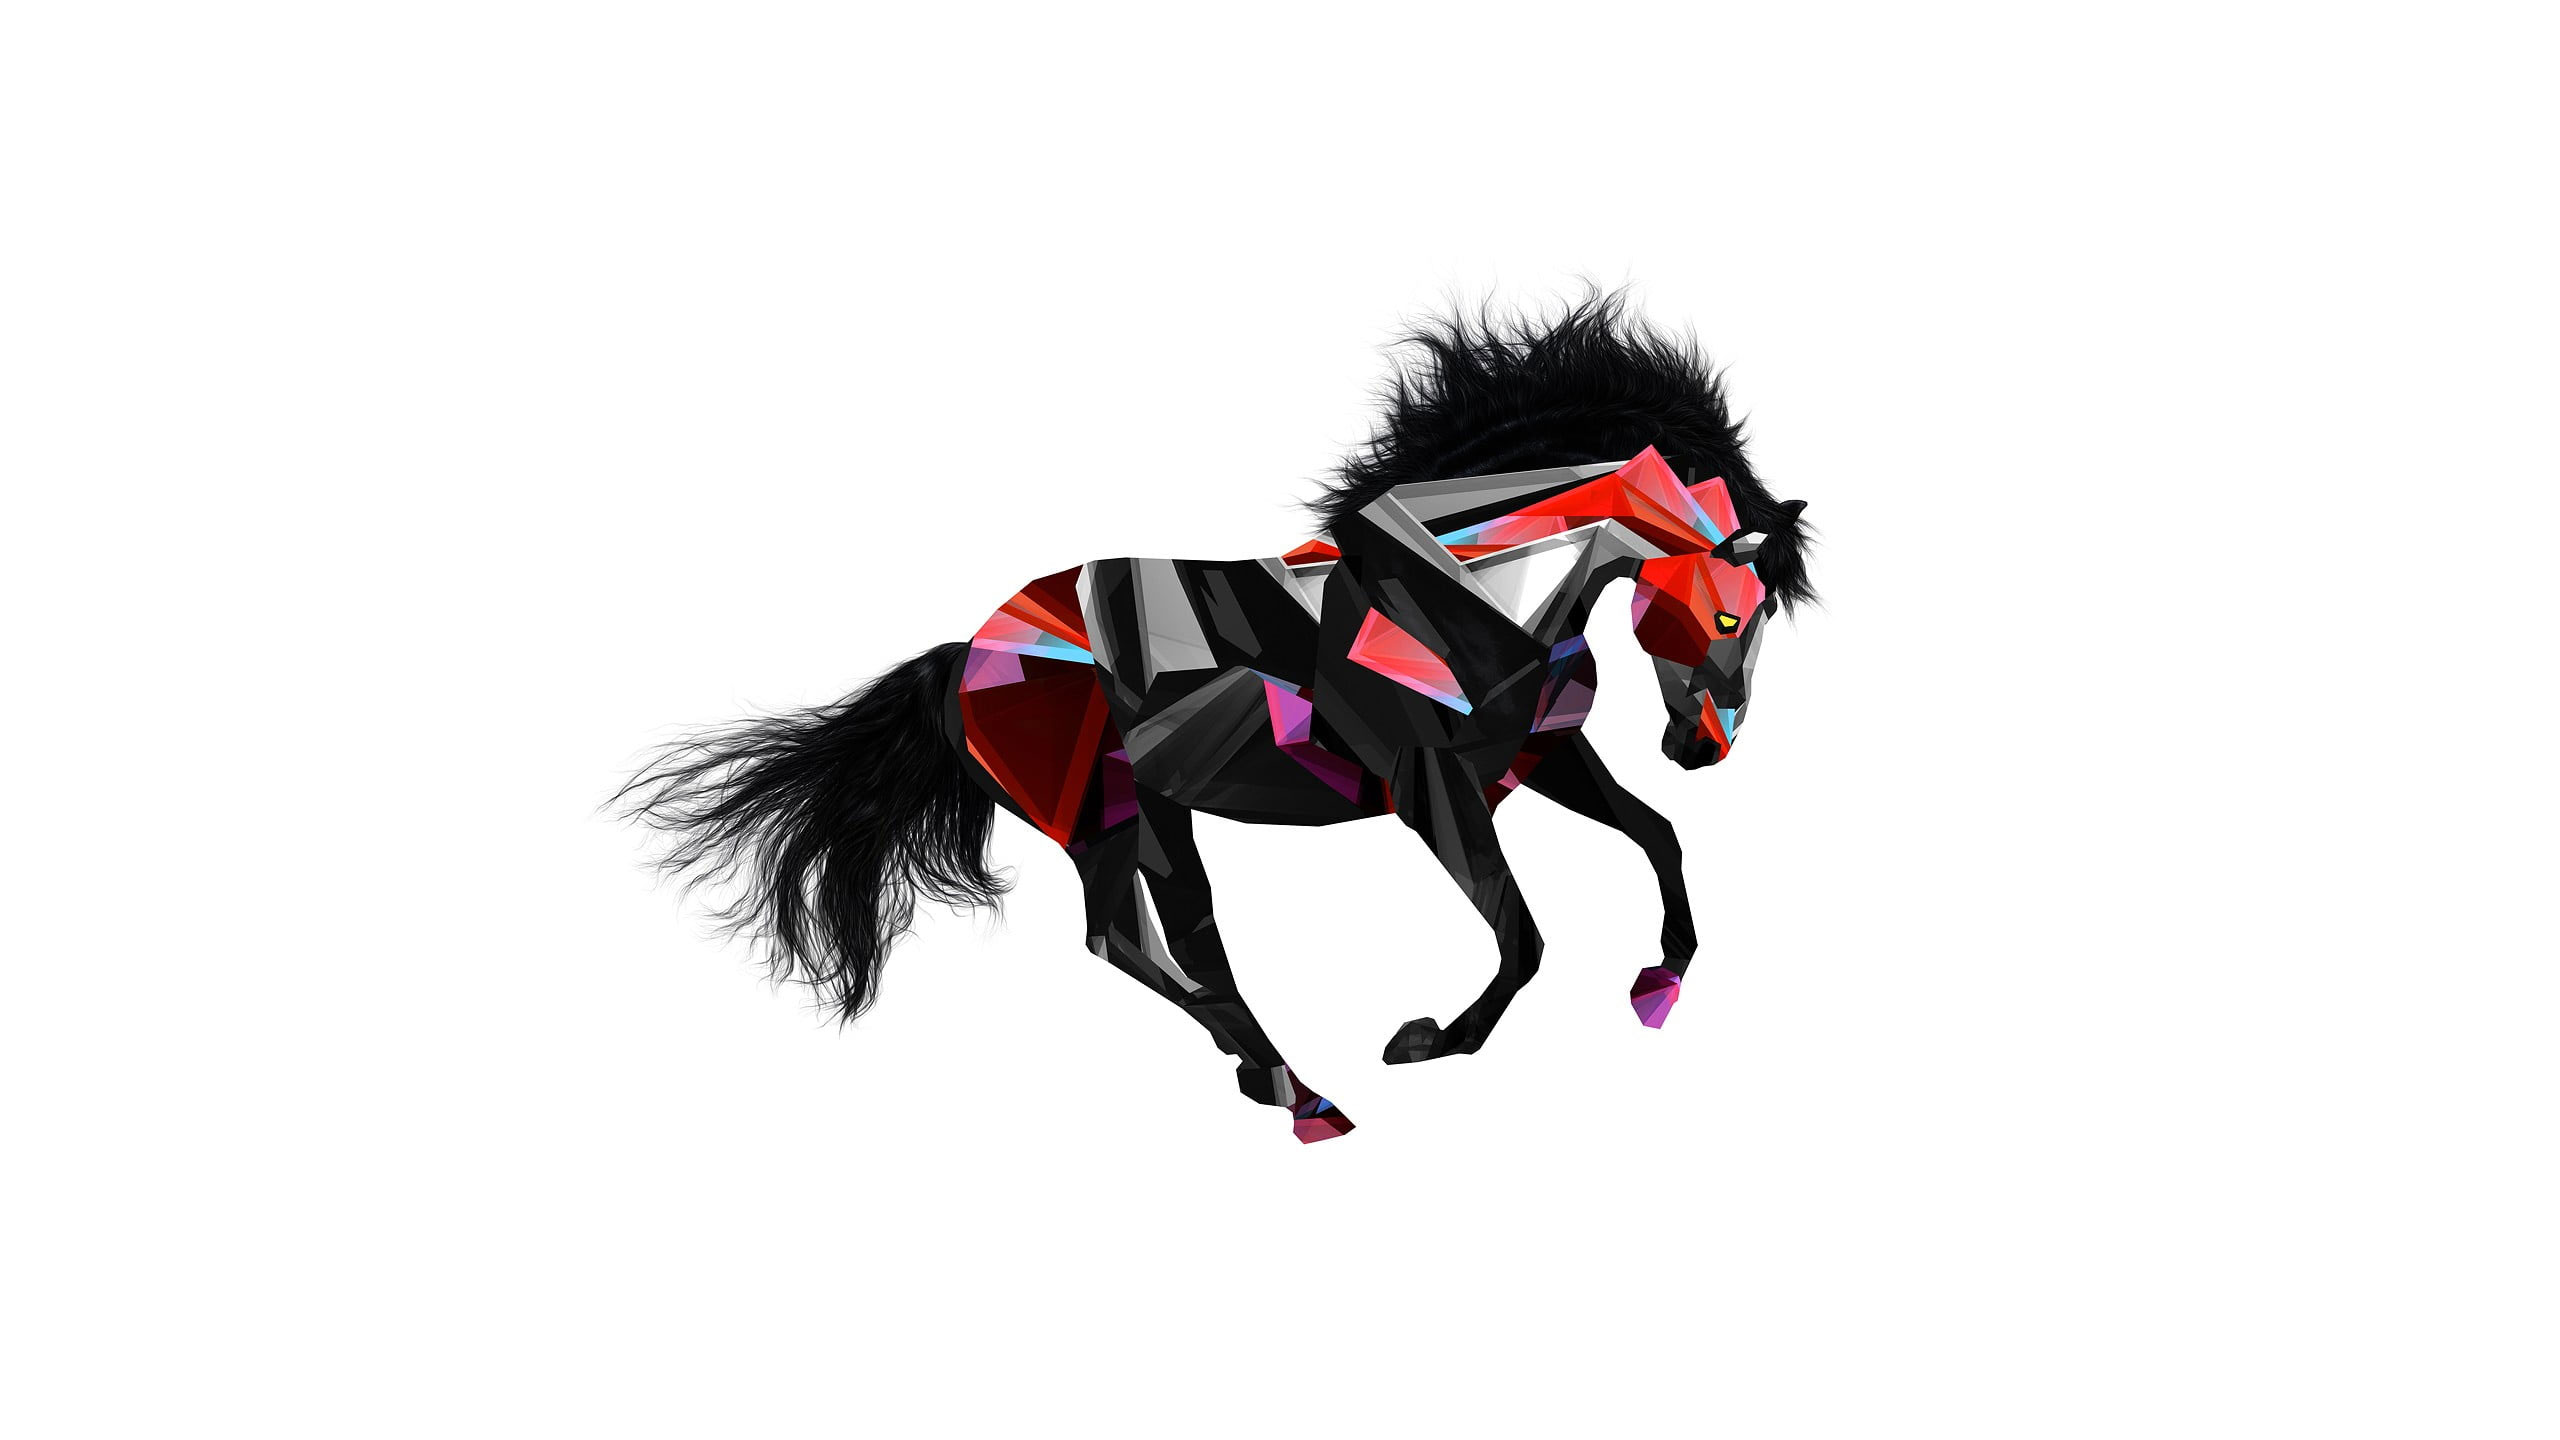 Black and red horse wallpaper illustration, animals